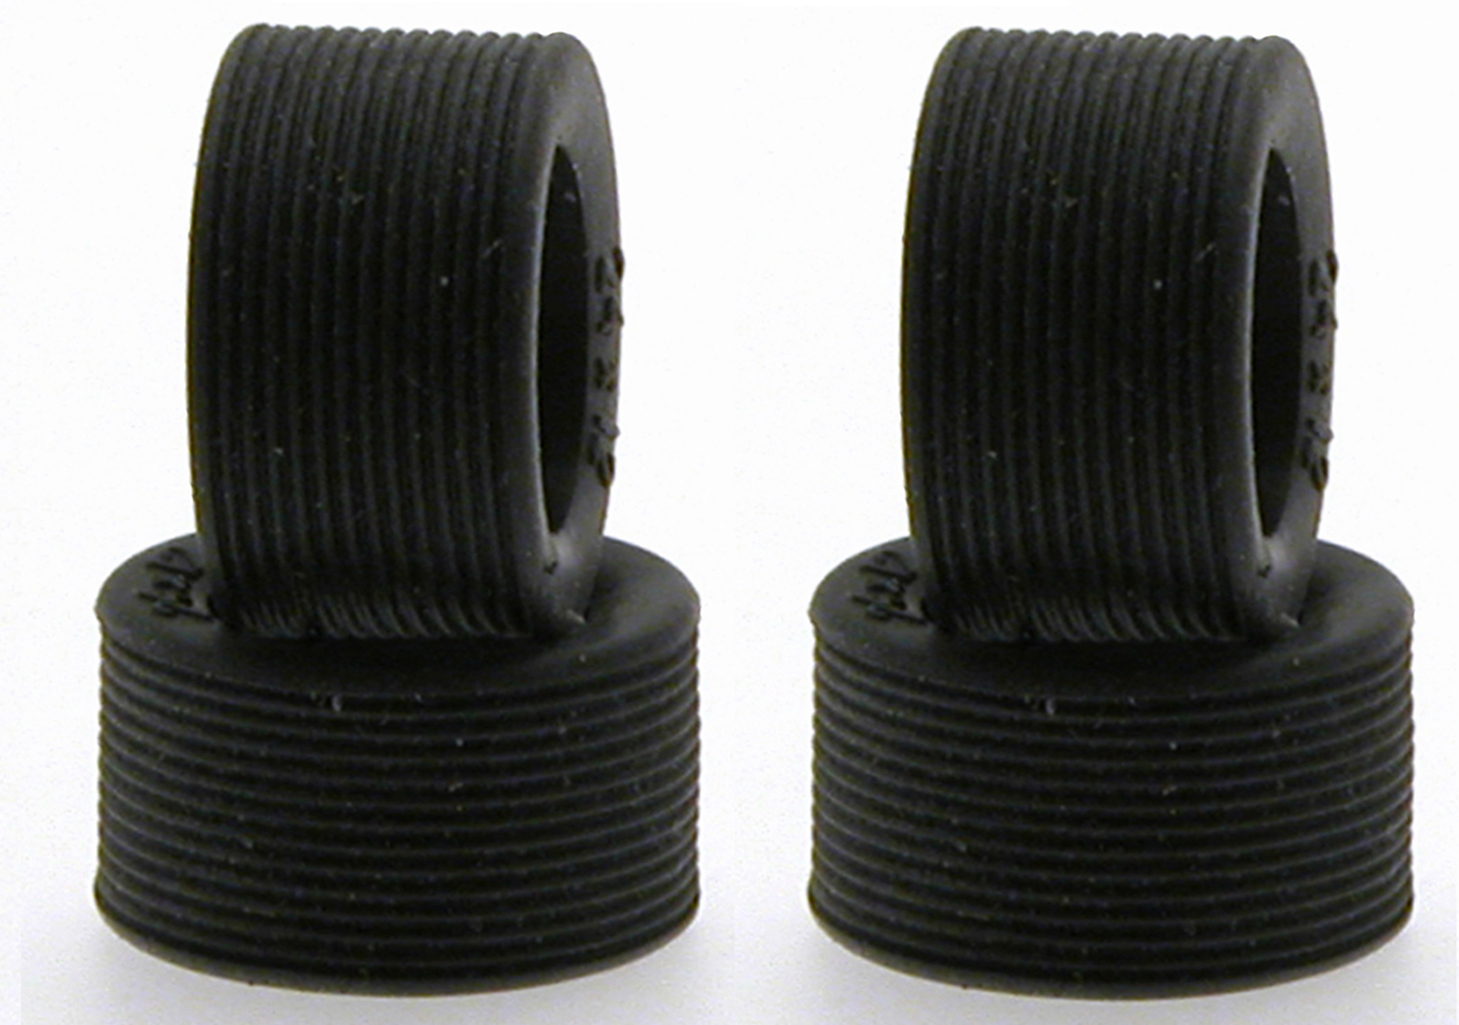 SC-4730 "RT" Racing Rubber tires for Profile hubs.